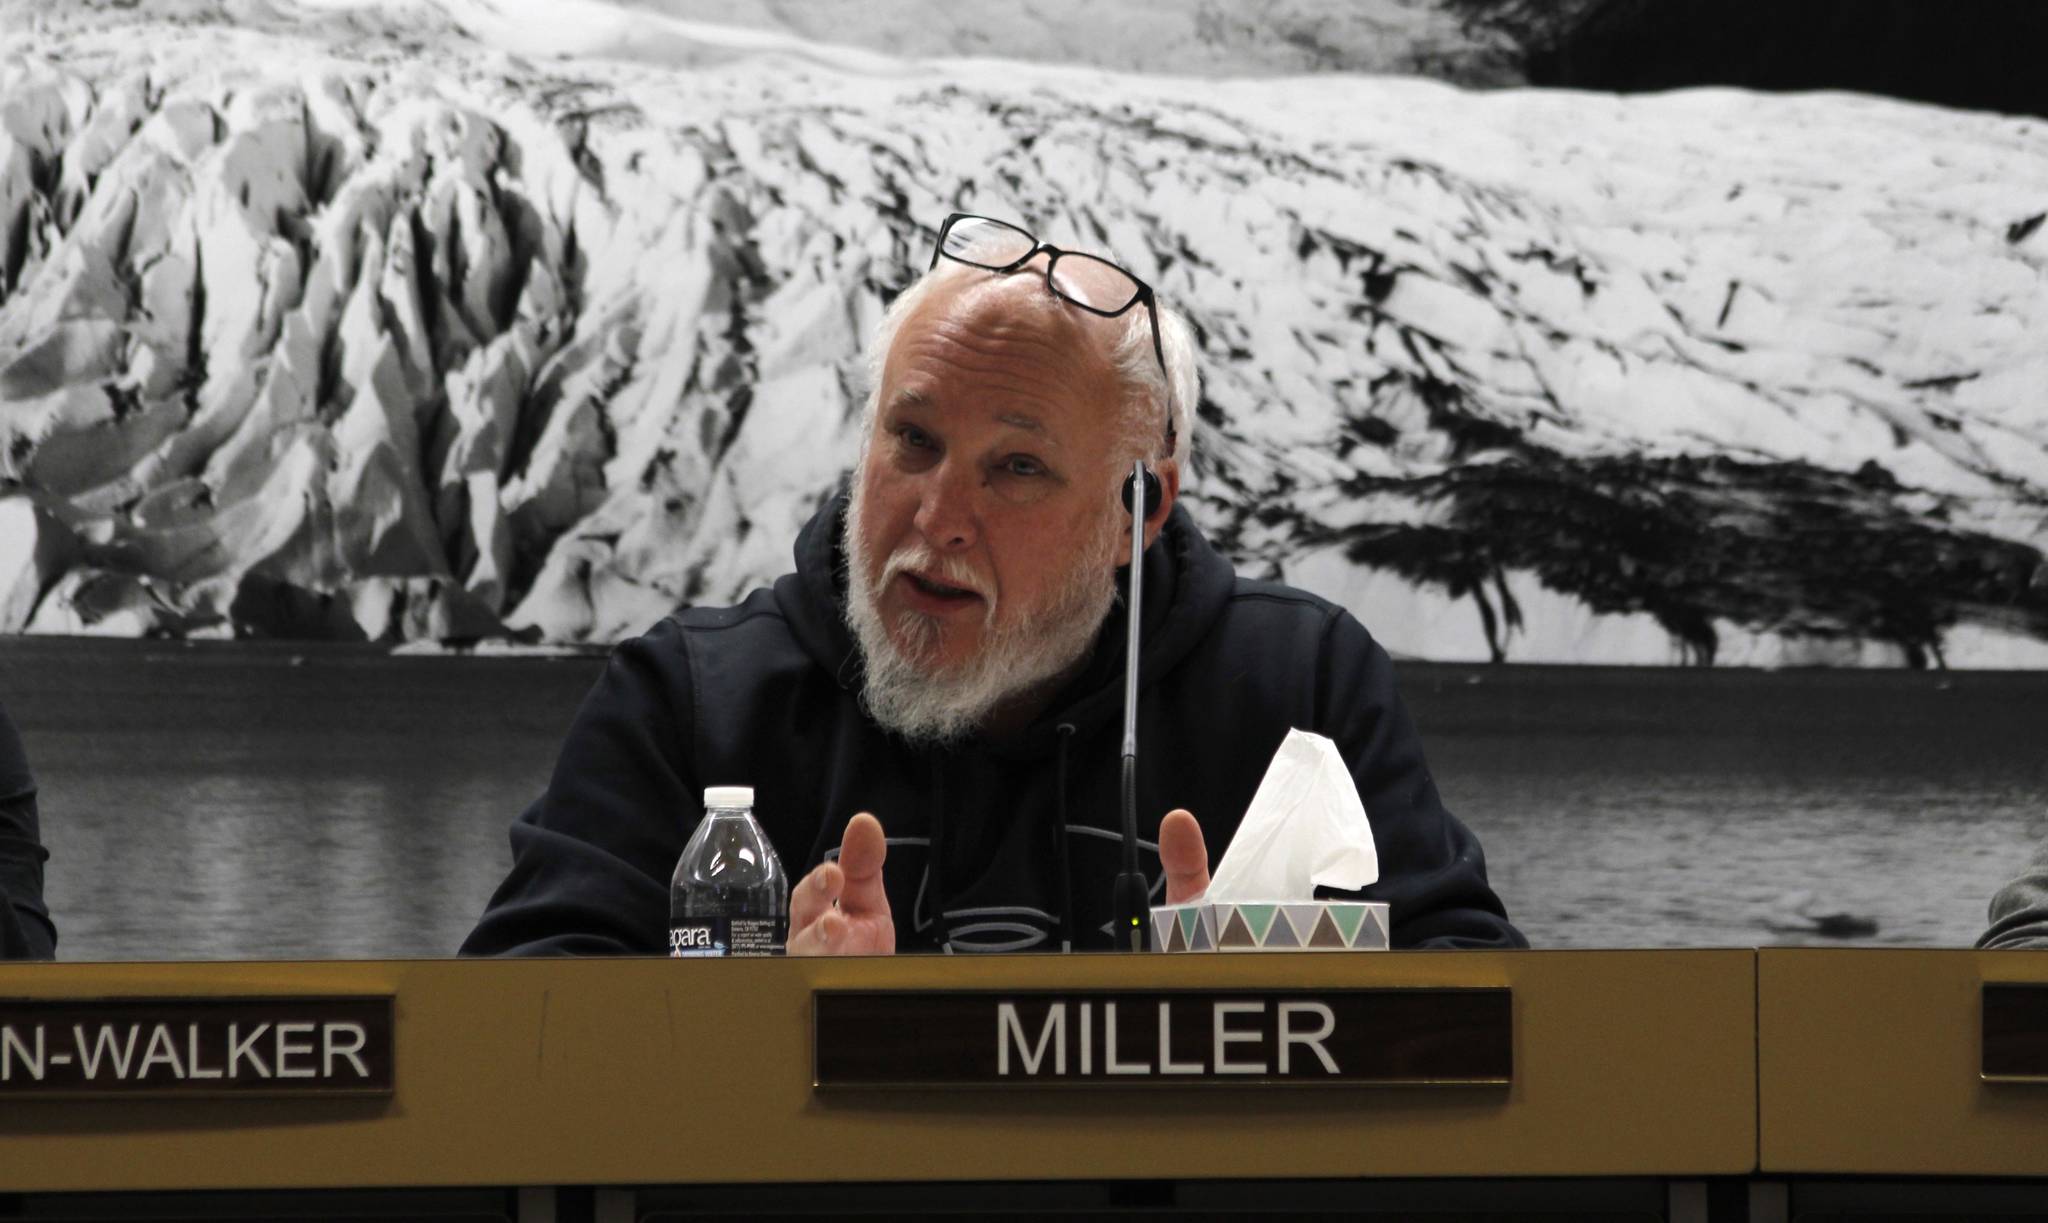 Planning Commission member Dan Miller explains his reasoning for moving to approve the Preliminary Plat for the Pederson Hill subdivision Tuesday night. The Planning Commission unanimously approved the Preliminary Plat proposal at the meeting. (Alex McCarthy | Juneau Empire)